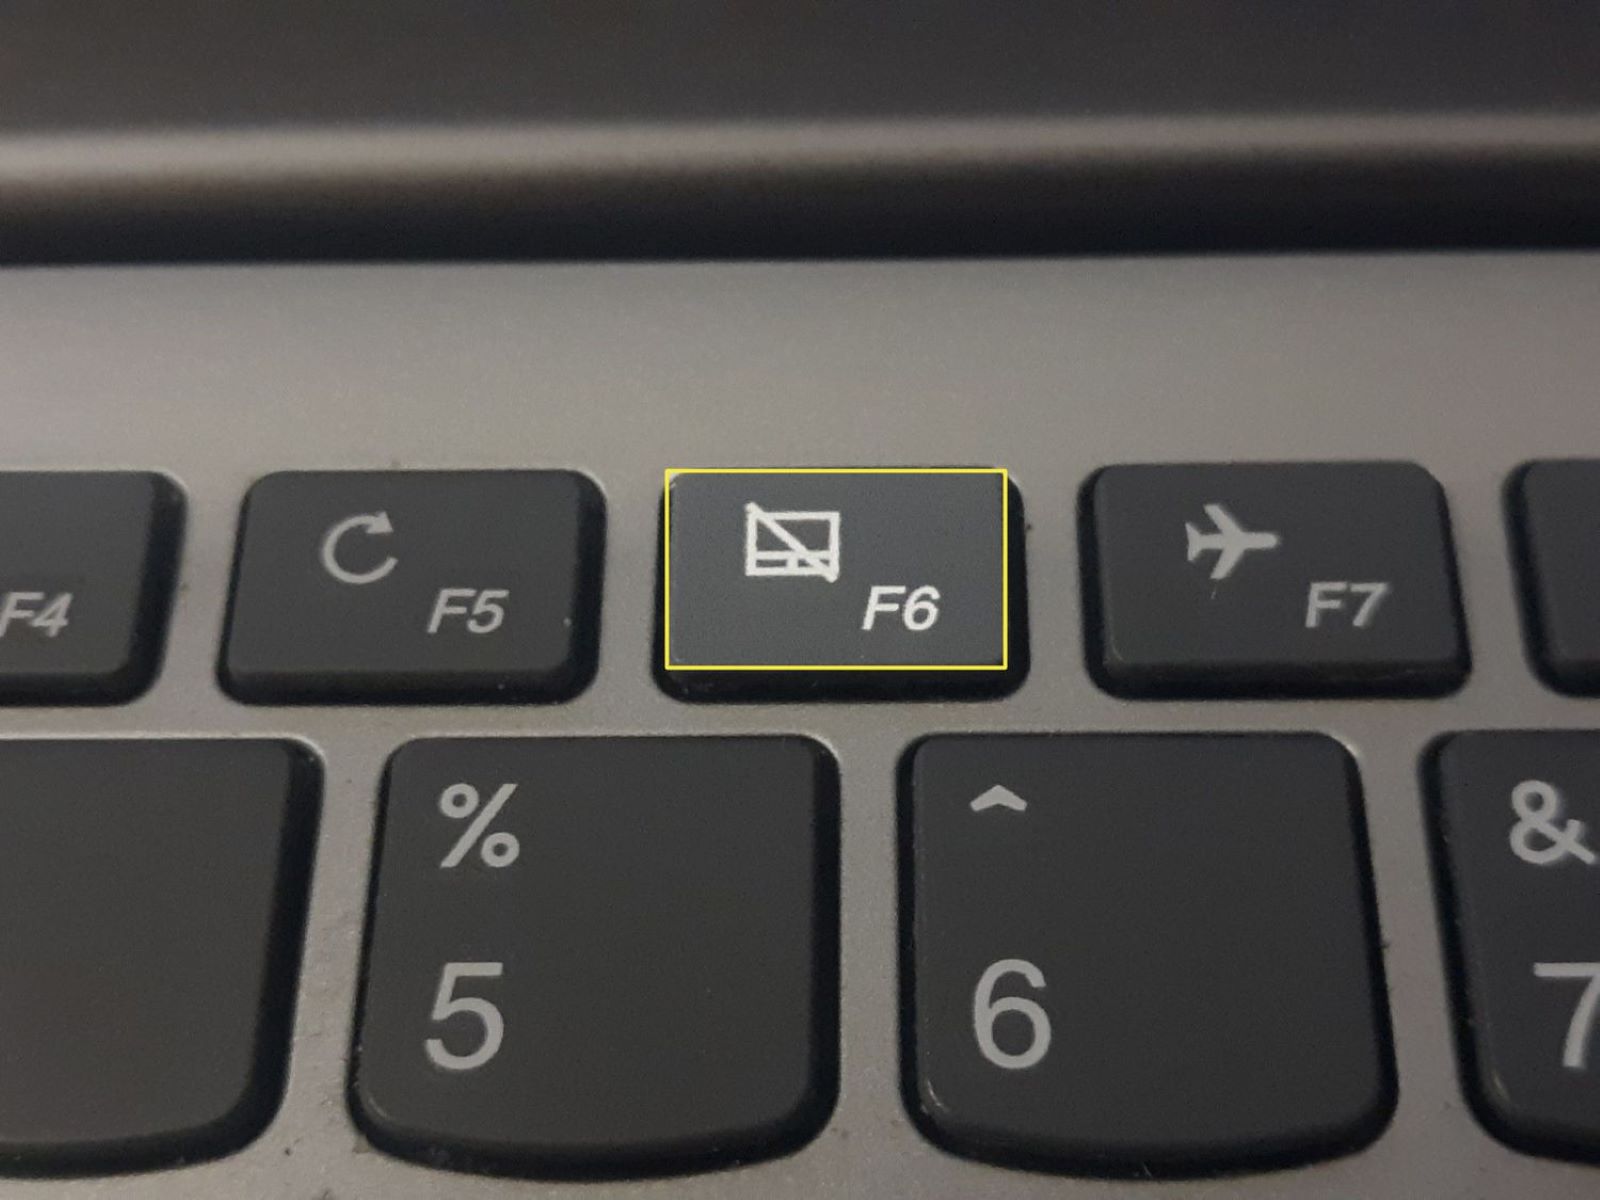 How To Unlock The Touchpad On A Lenovo Laptop